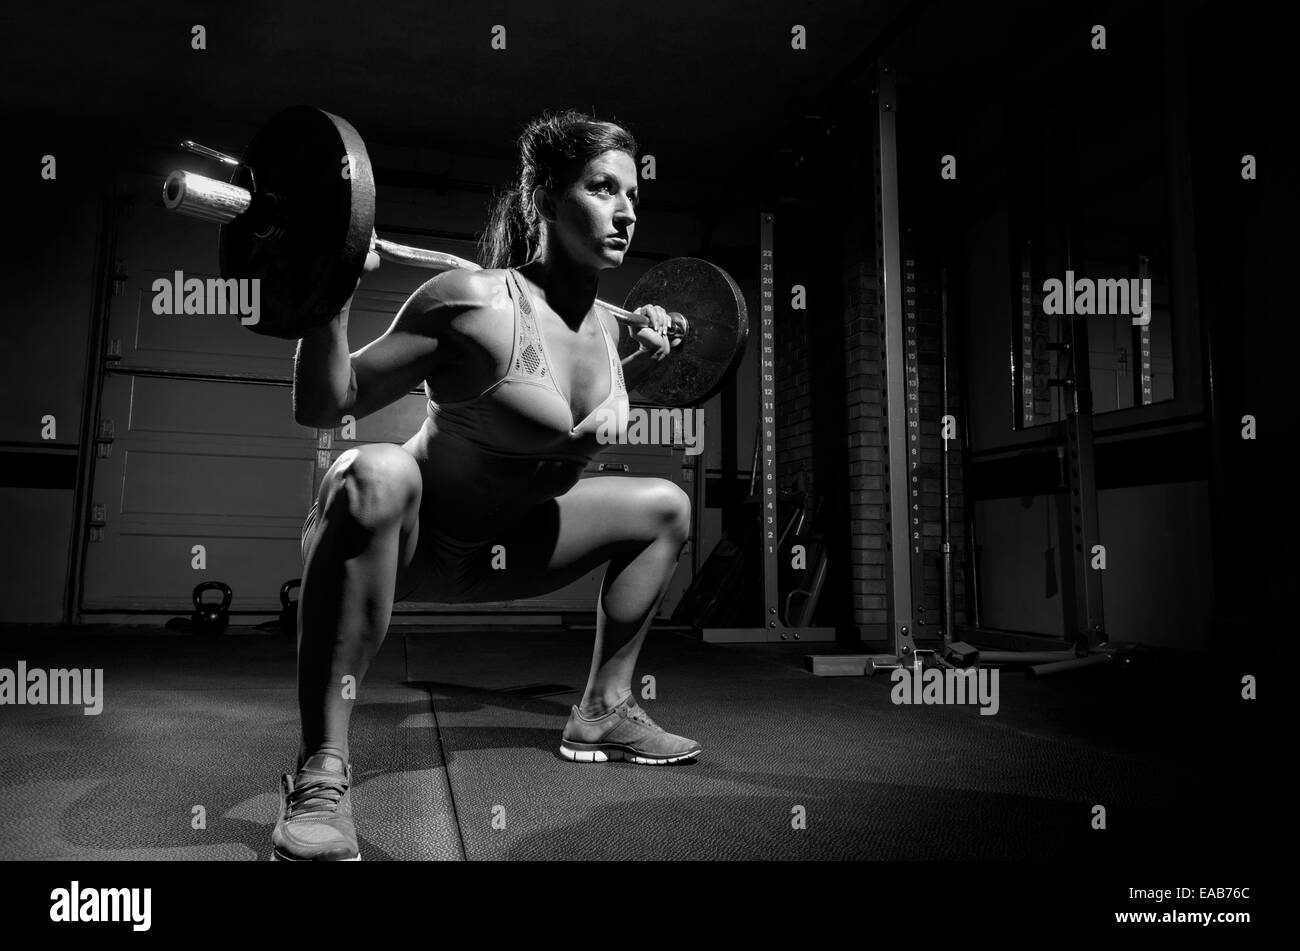 This is a woman working out in black and white. Stock Photo